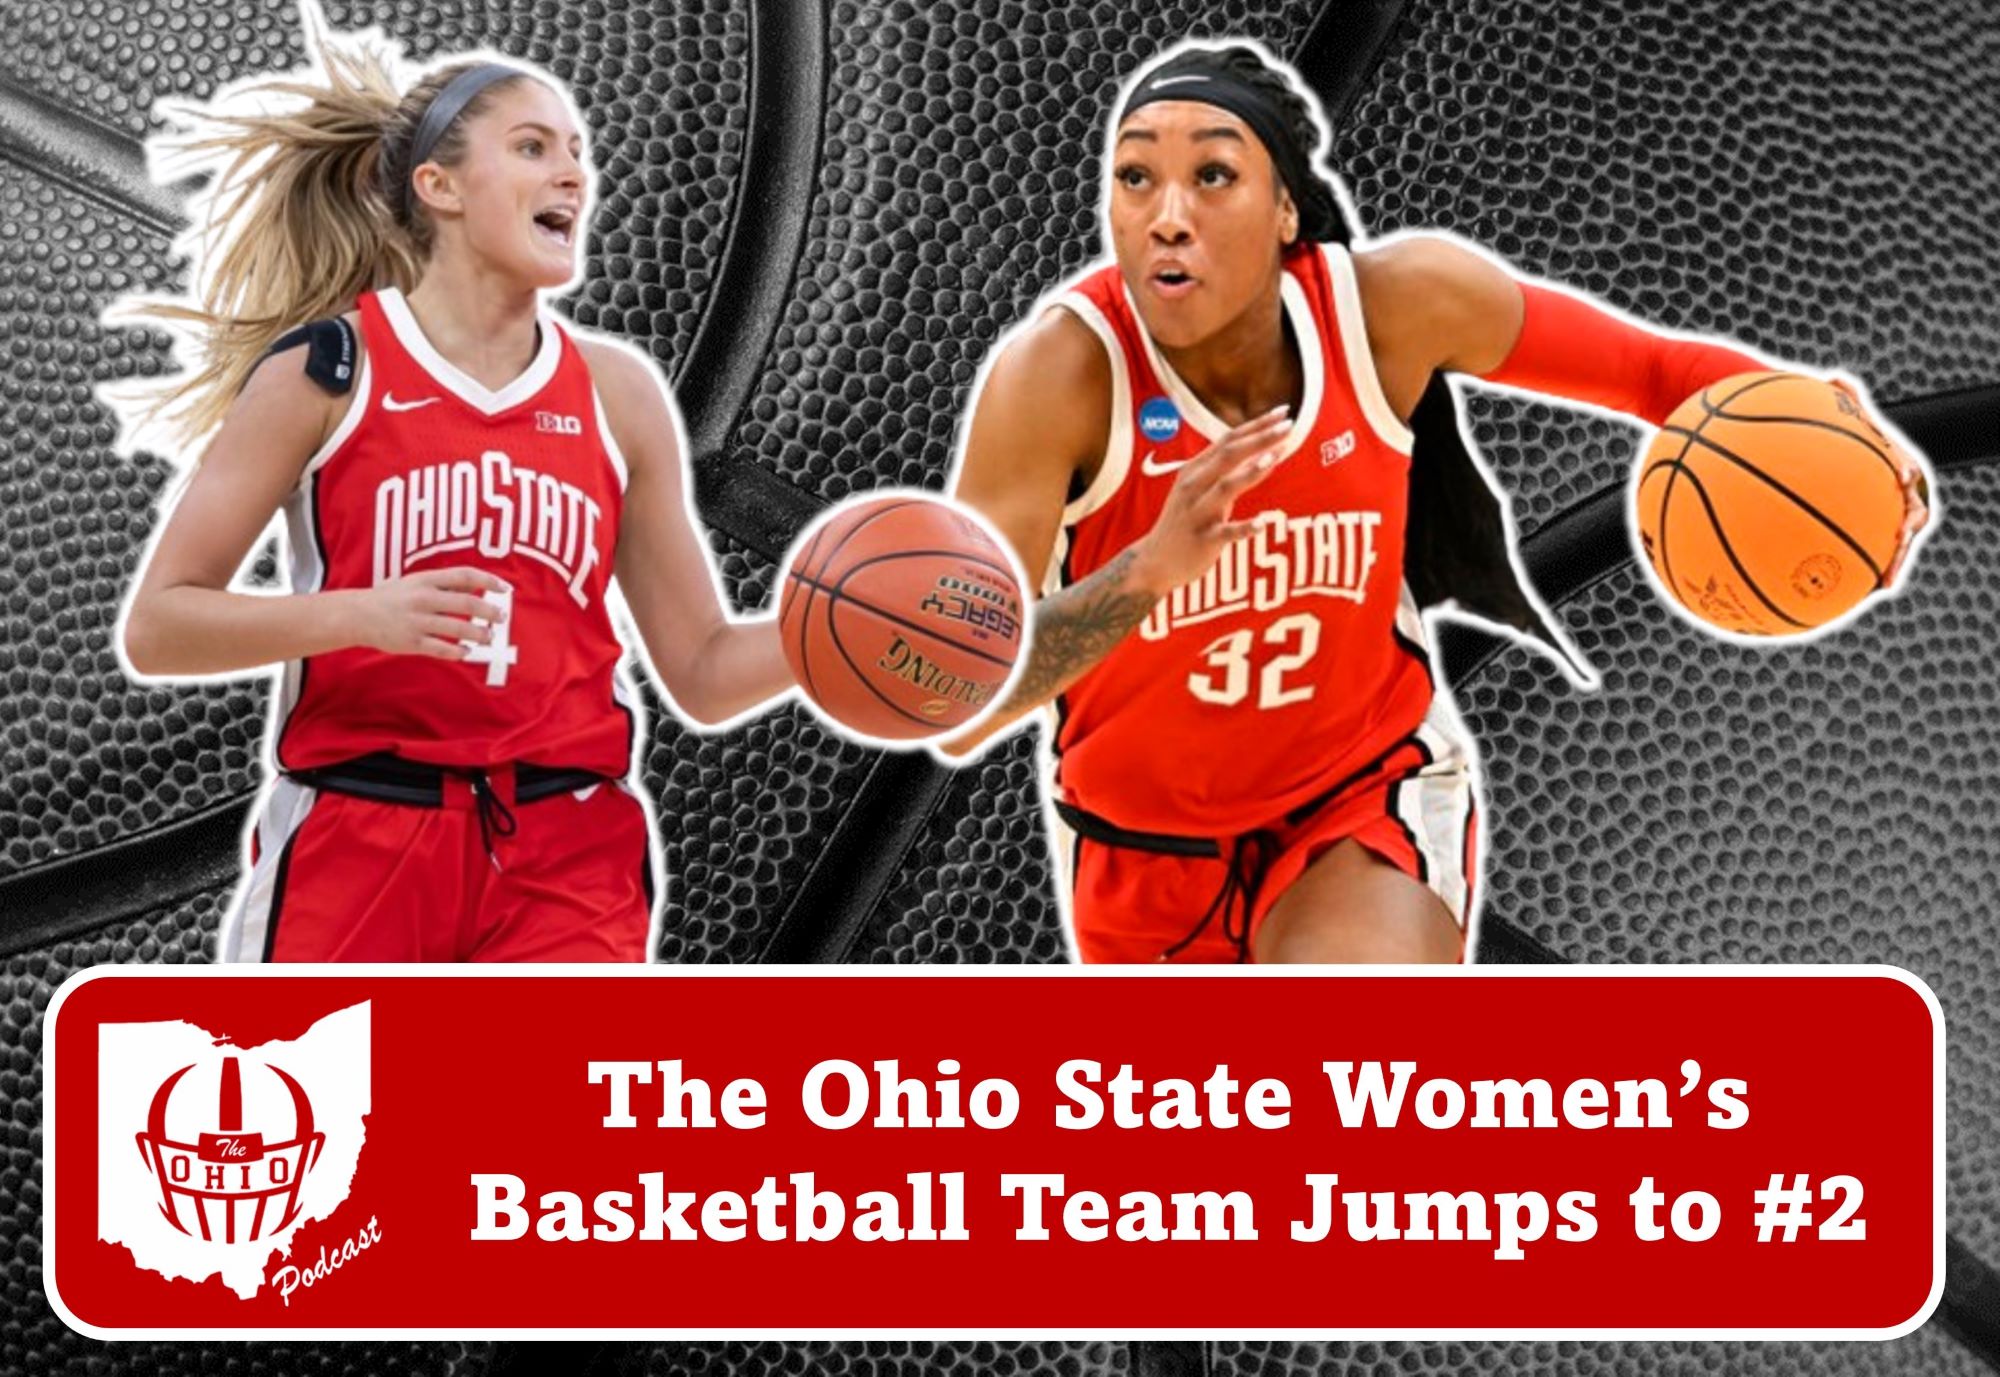 The Ohio State Women's Basketball Team Jumps to #2